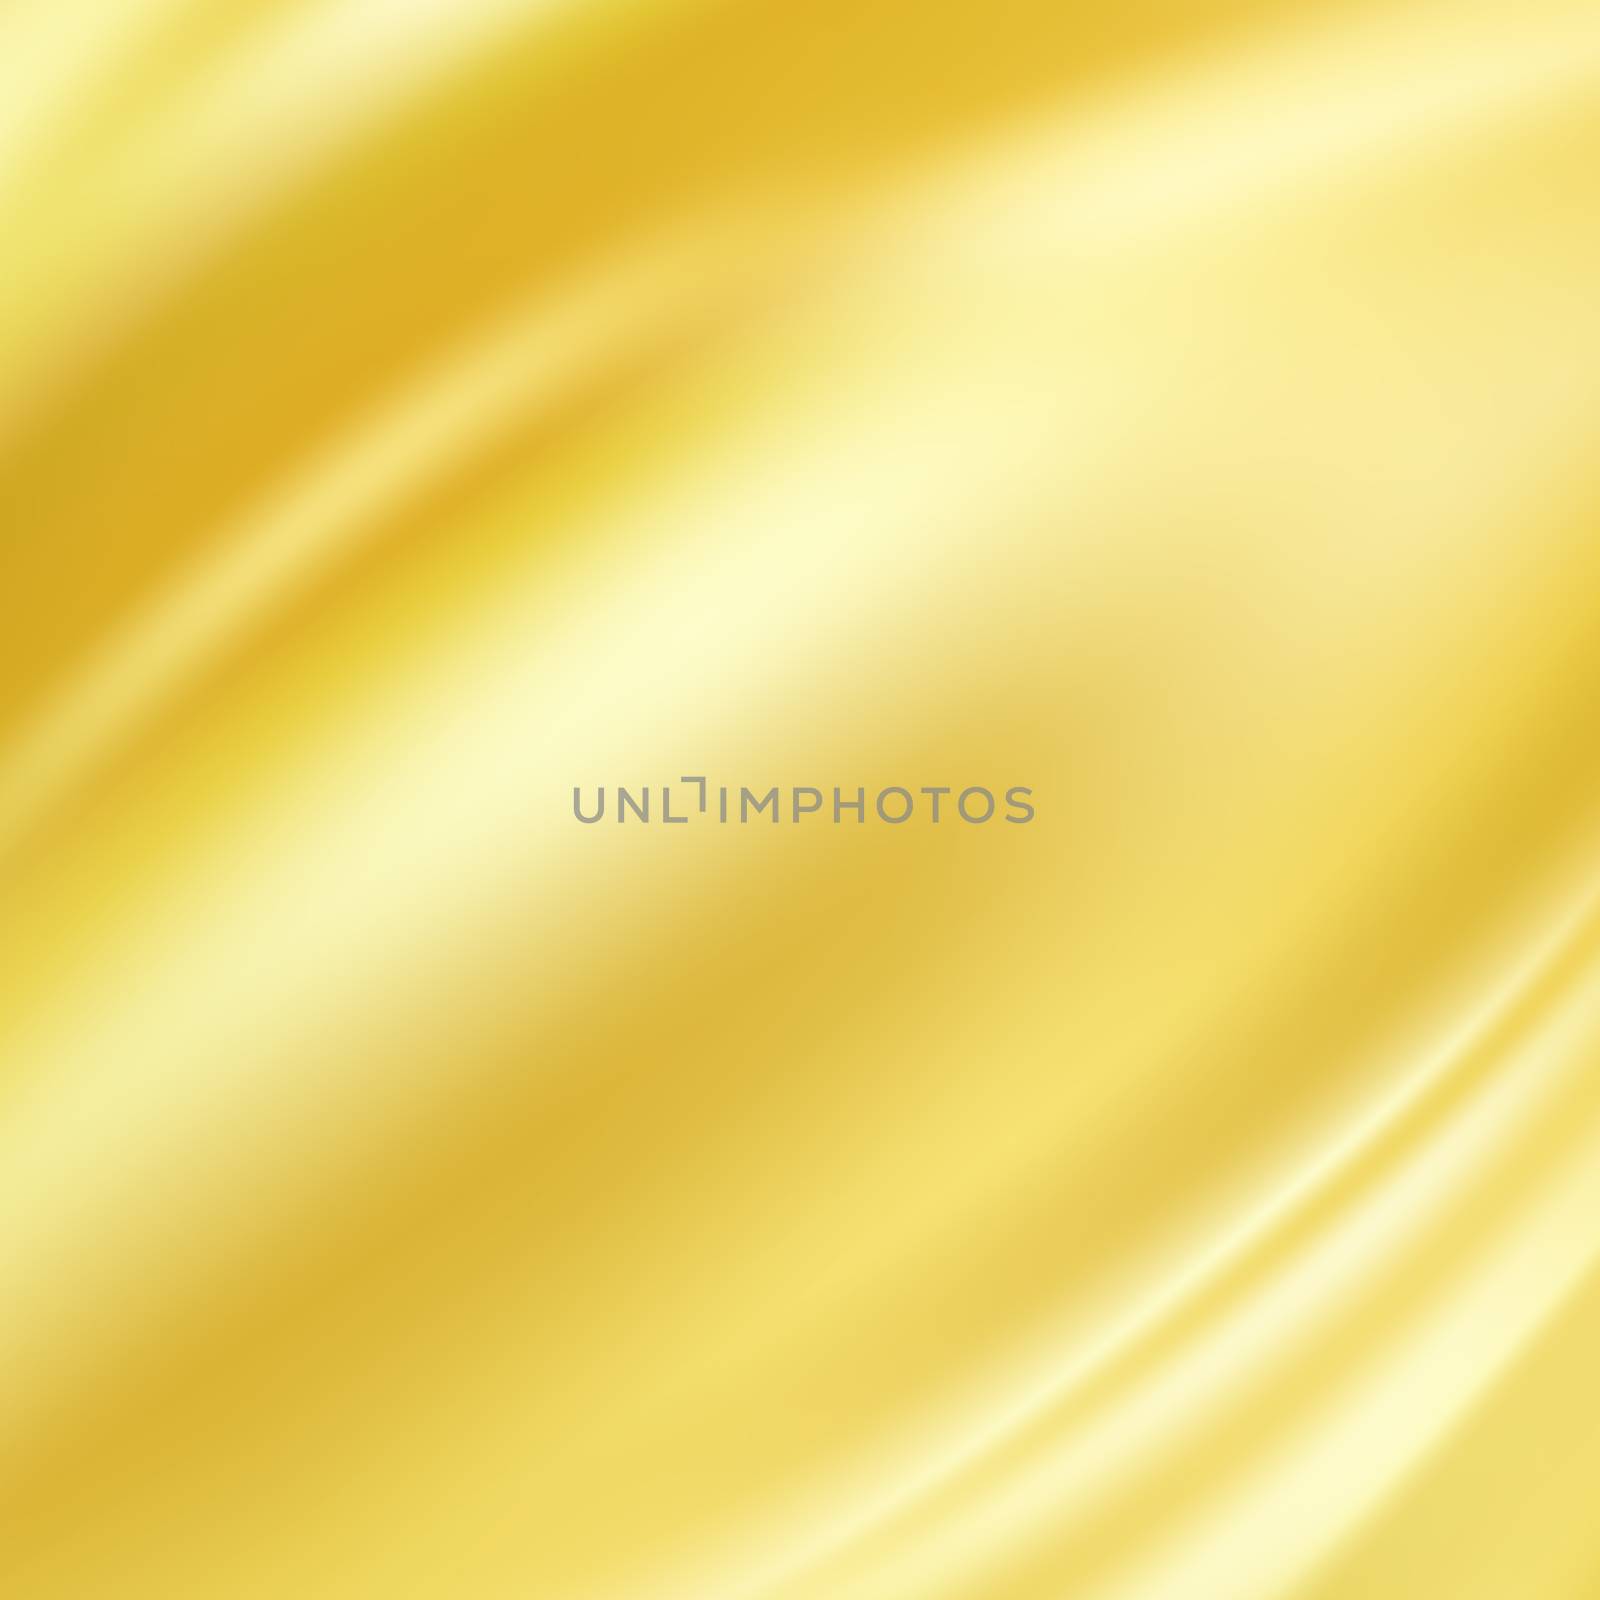 Gold Silk Fabric for Drapery Abstract Background